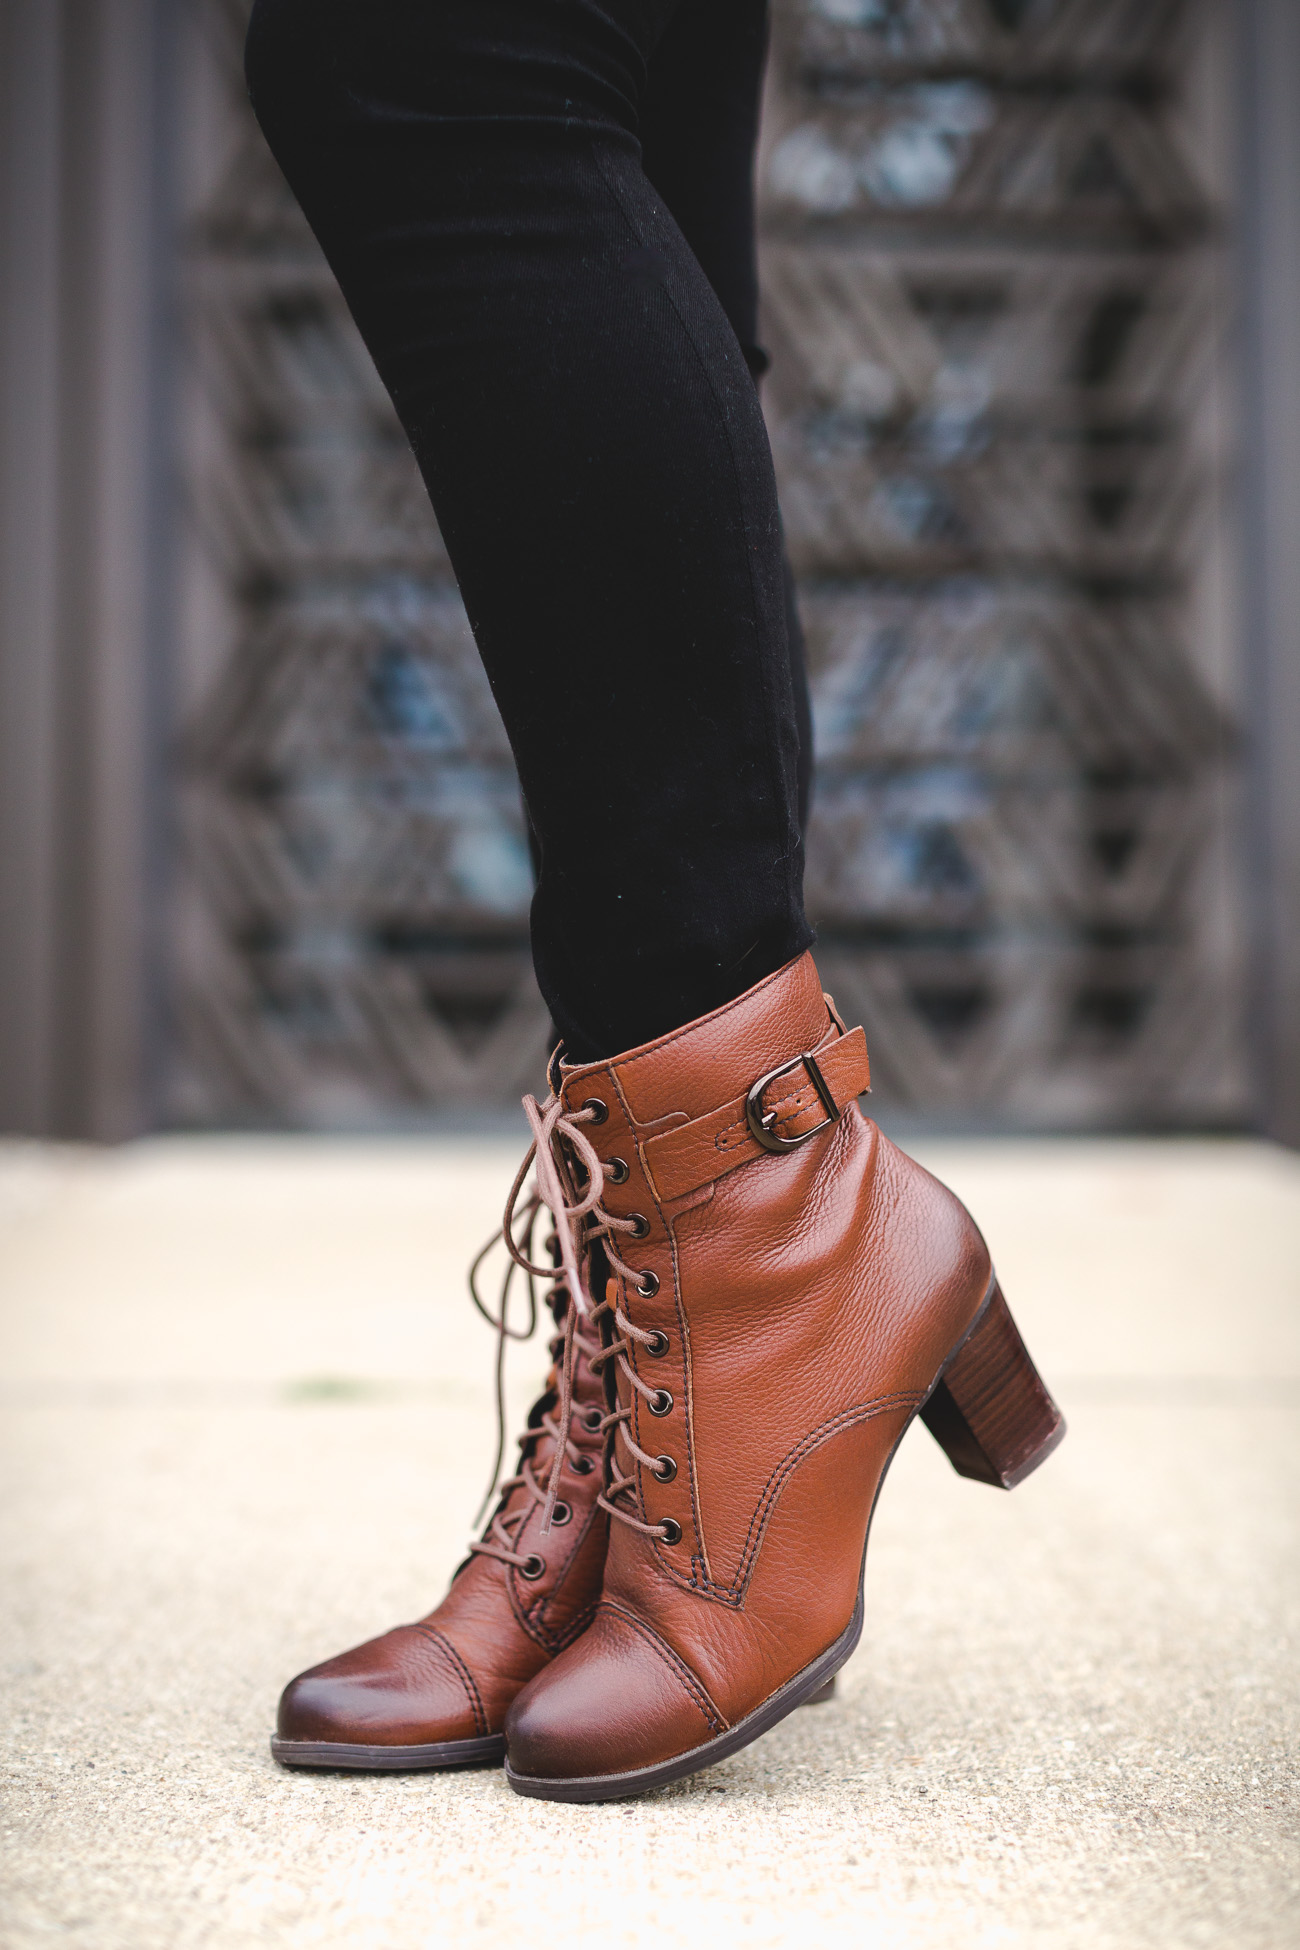 cute brown combat boots tumblr